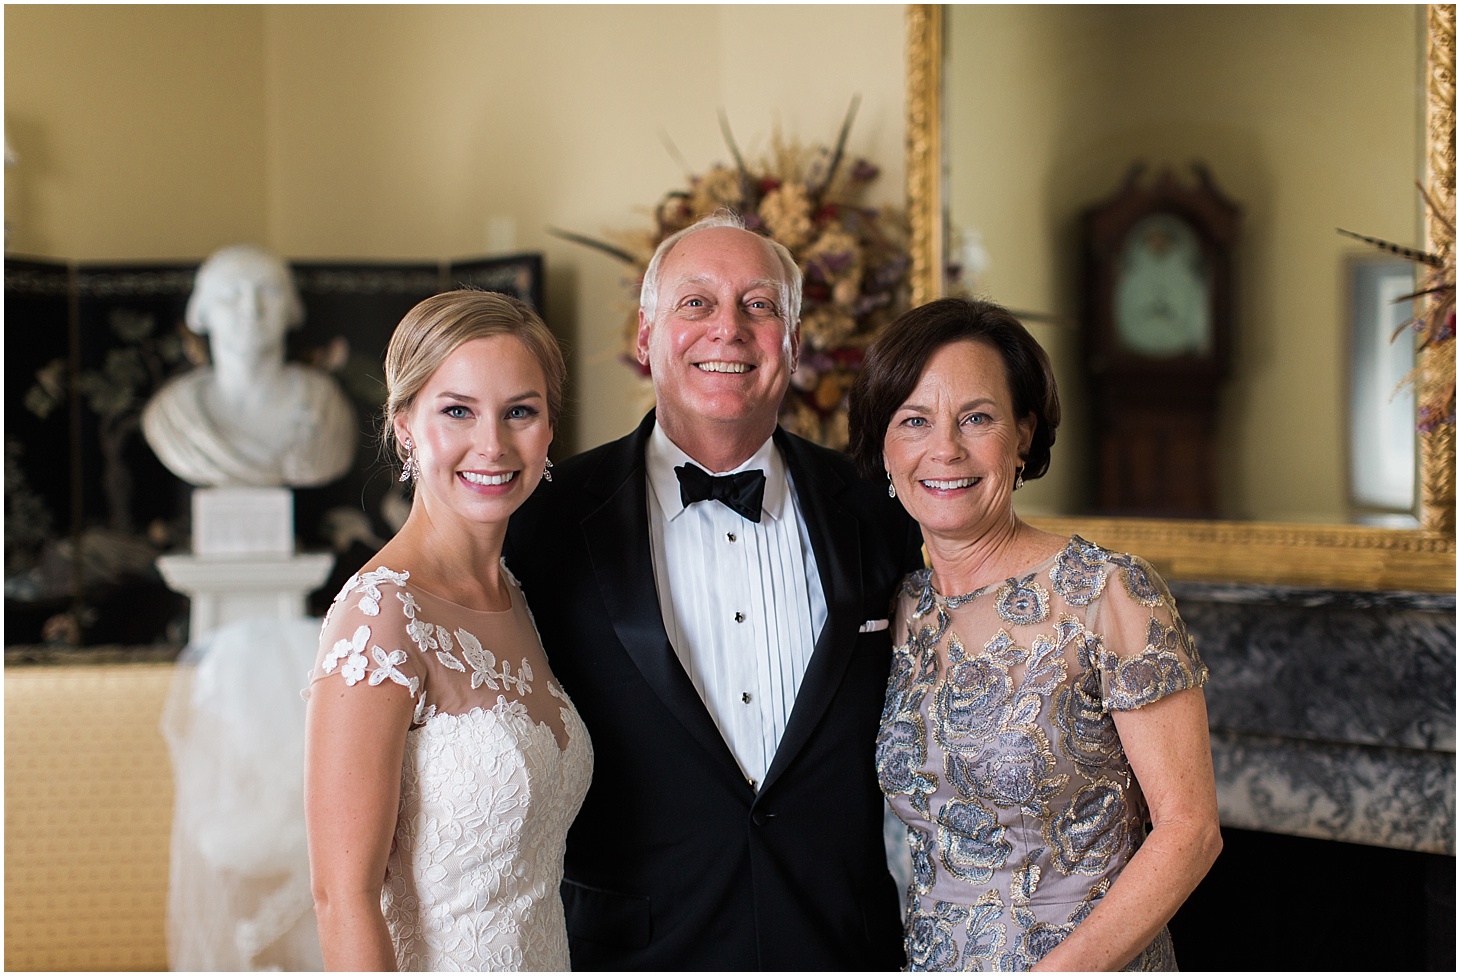 Bride with Parents | Wedding Ceremony at Old Presbyterian Meeting House | Southern Black Tie wedding at St. Regis DC in Dusty Blue and Ivory | Sarah Bradshaw Photography